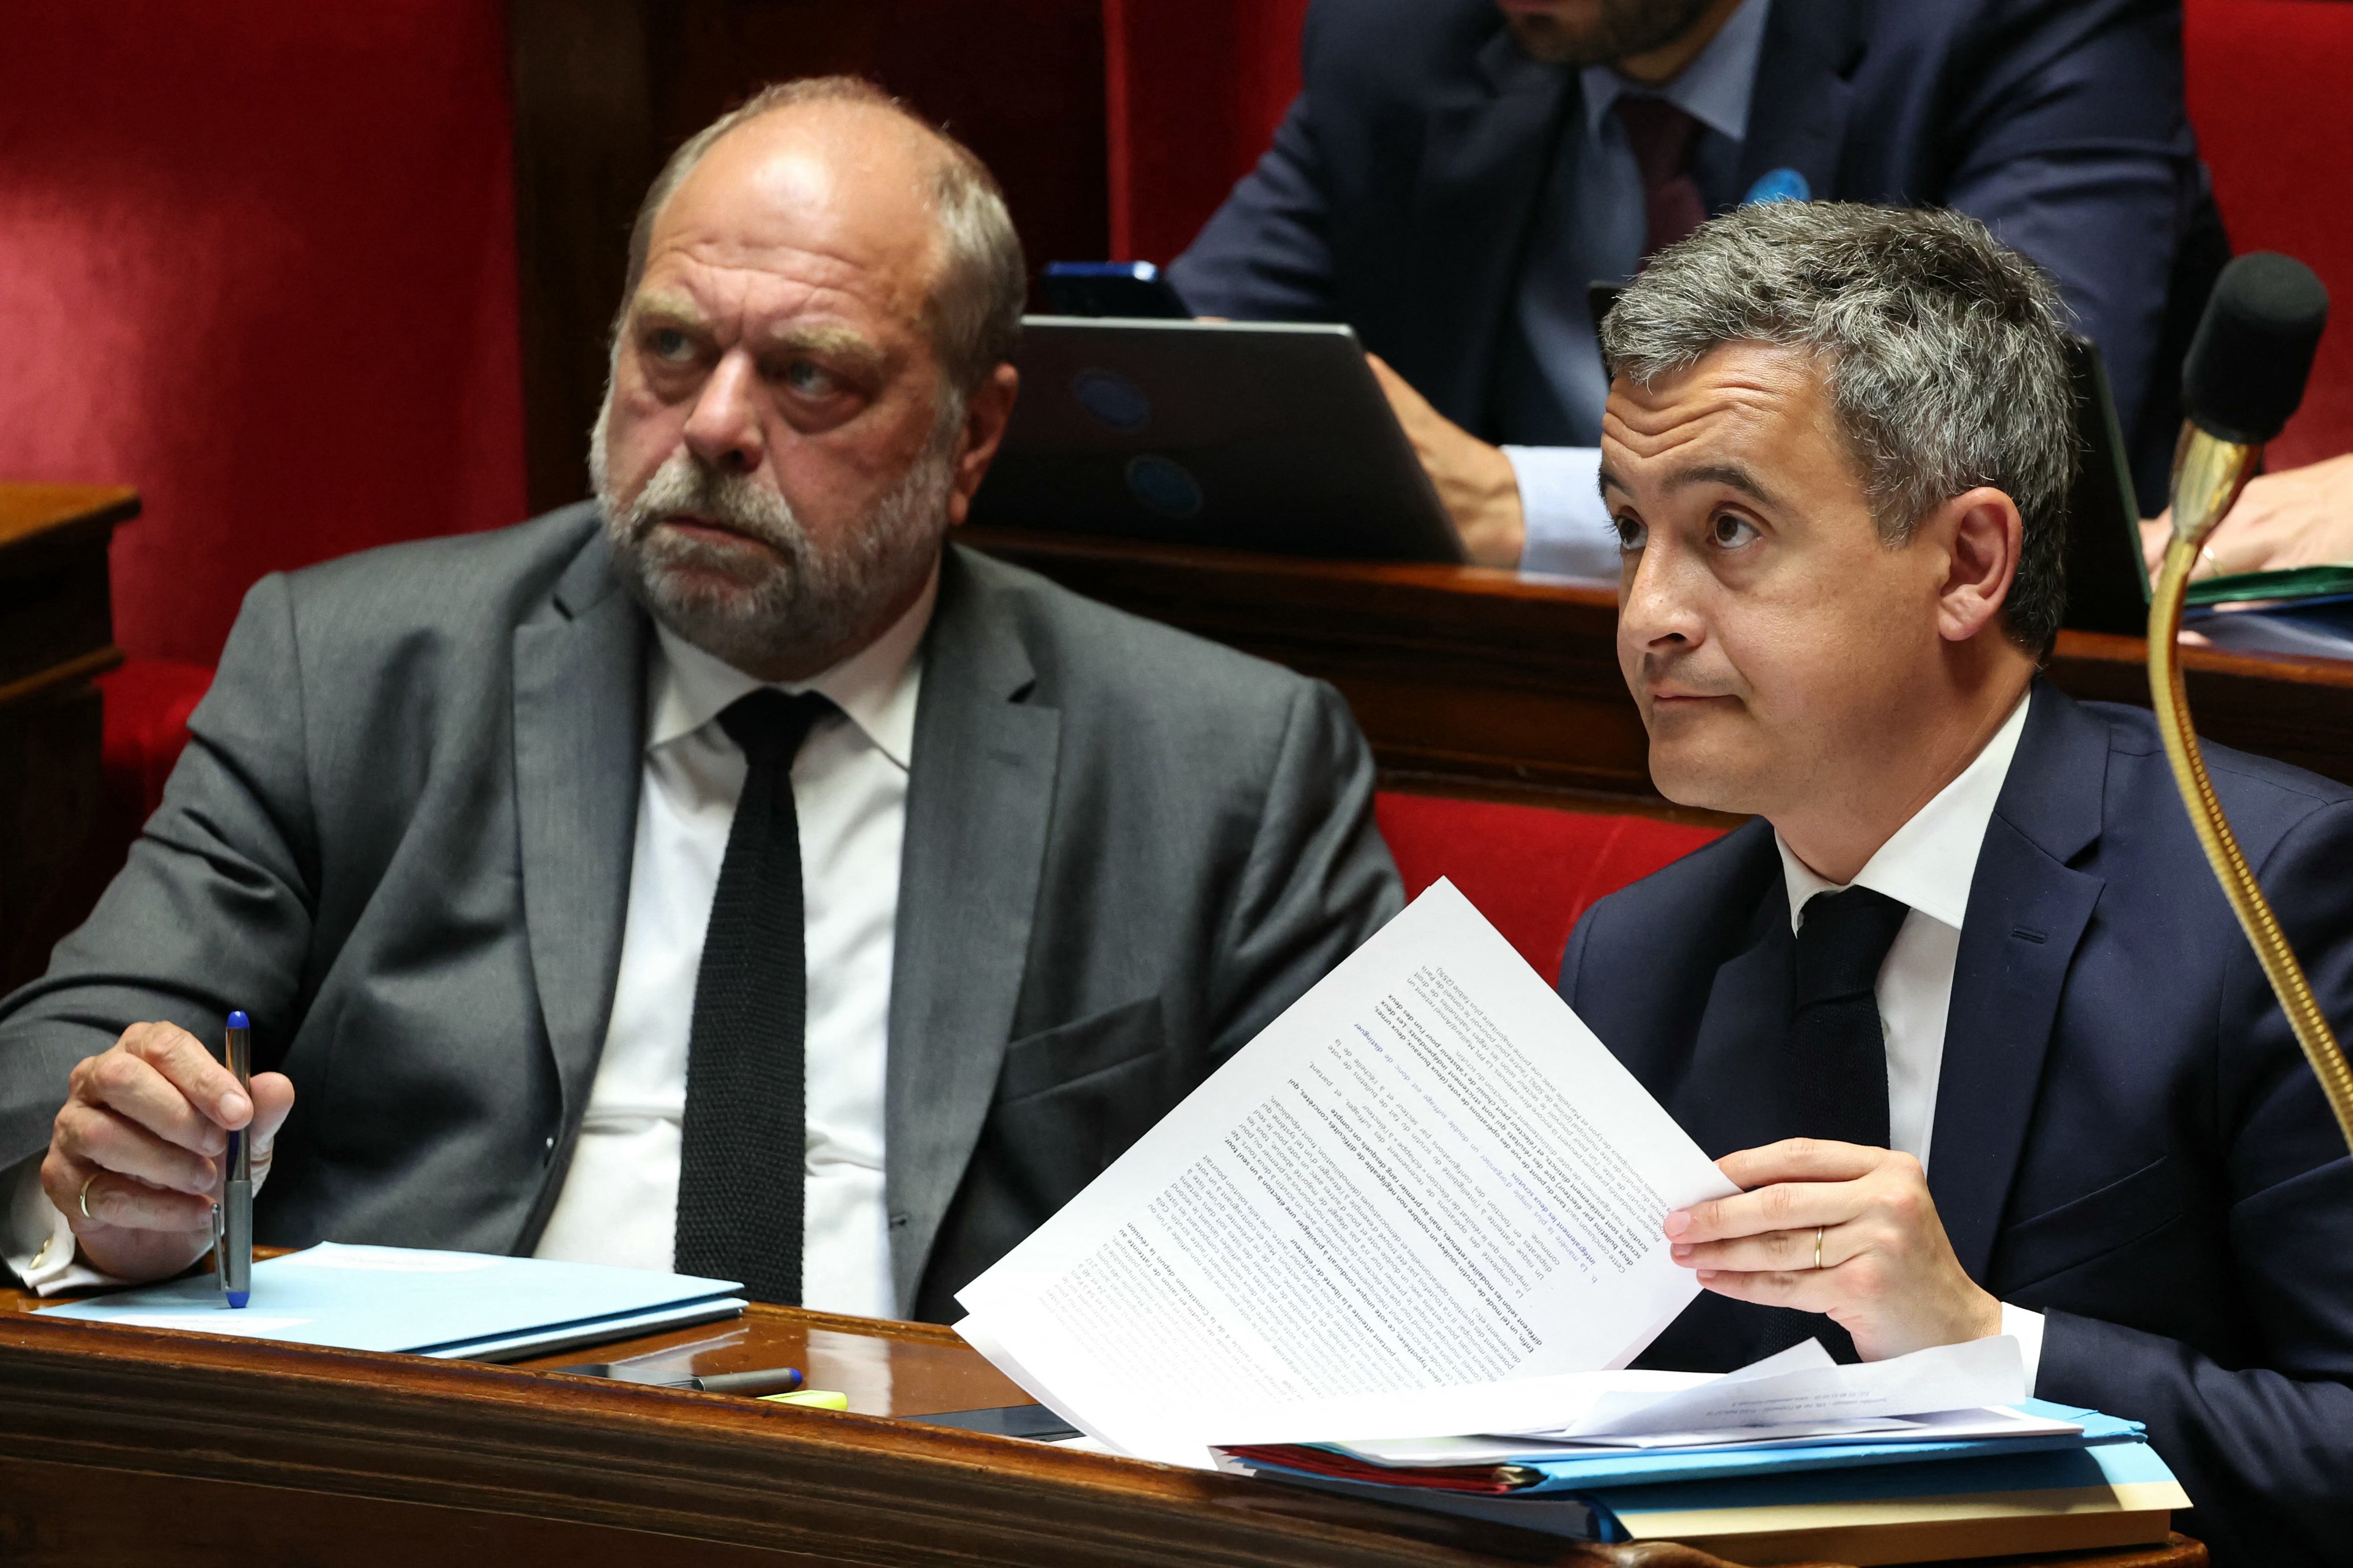 France's Minister for Interior and Overseas Gerald Darmanin (R) and France's Justice Minister Eric Dupond-Moretti attend a debate on the constitutional bill aimed at enlarging the electorate of the overseas French territory of New Caledonia